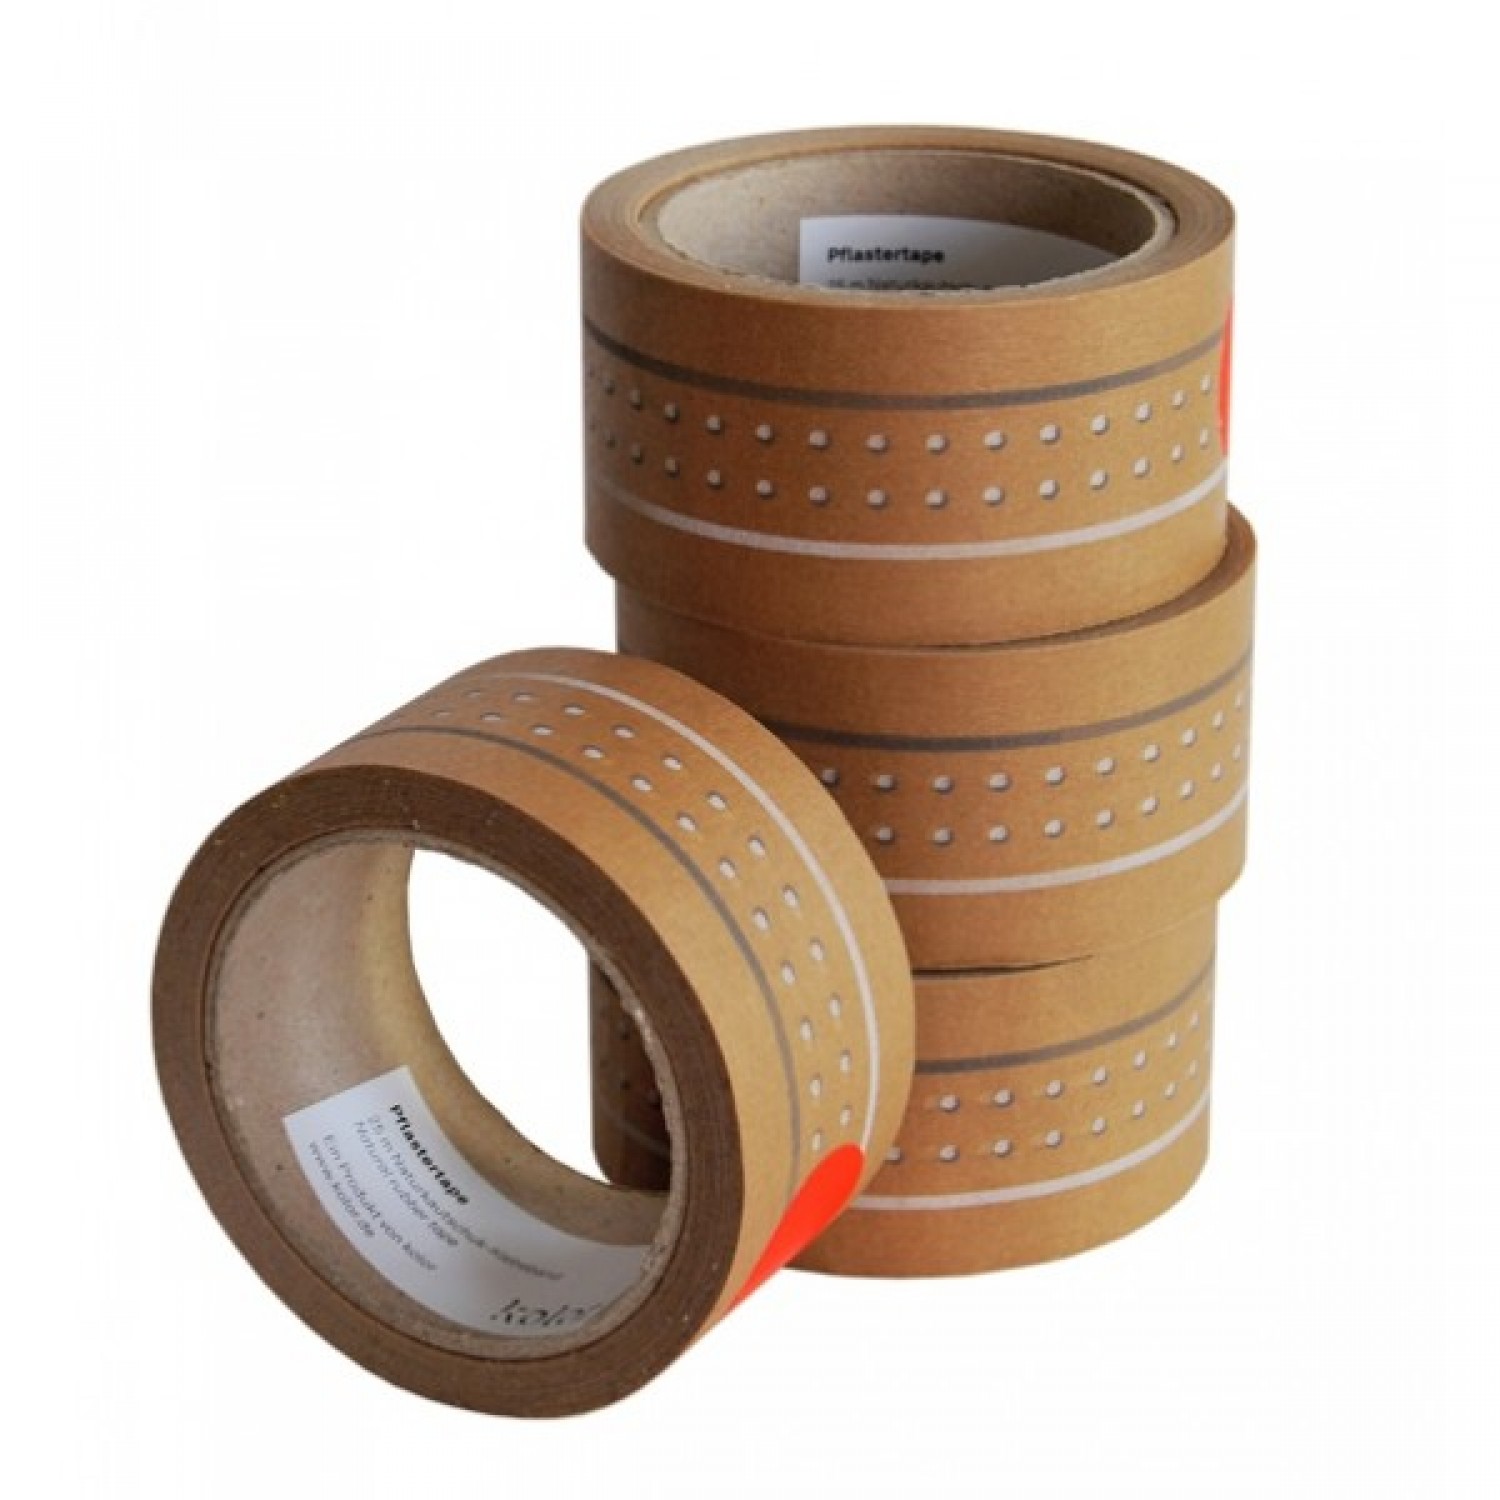 Band-aid tape – Sticky tape